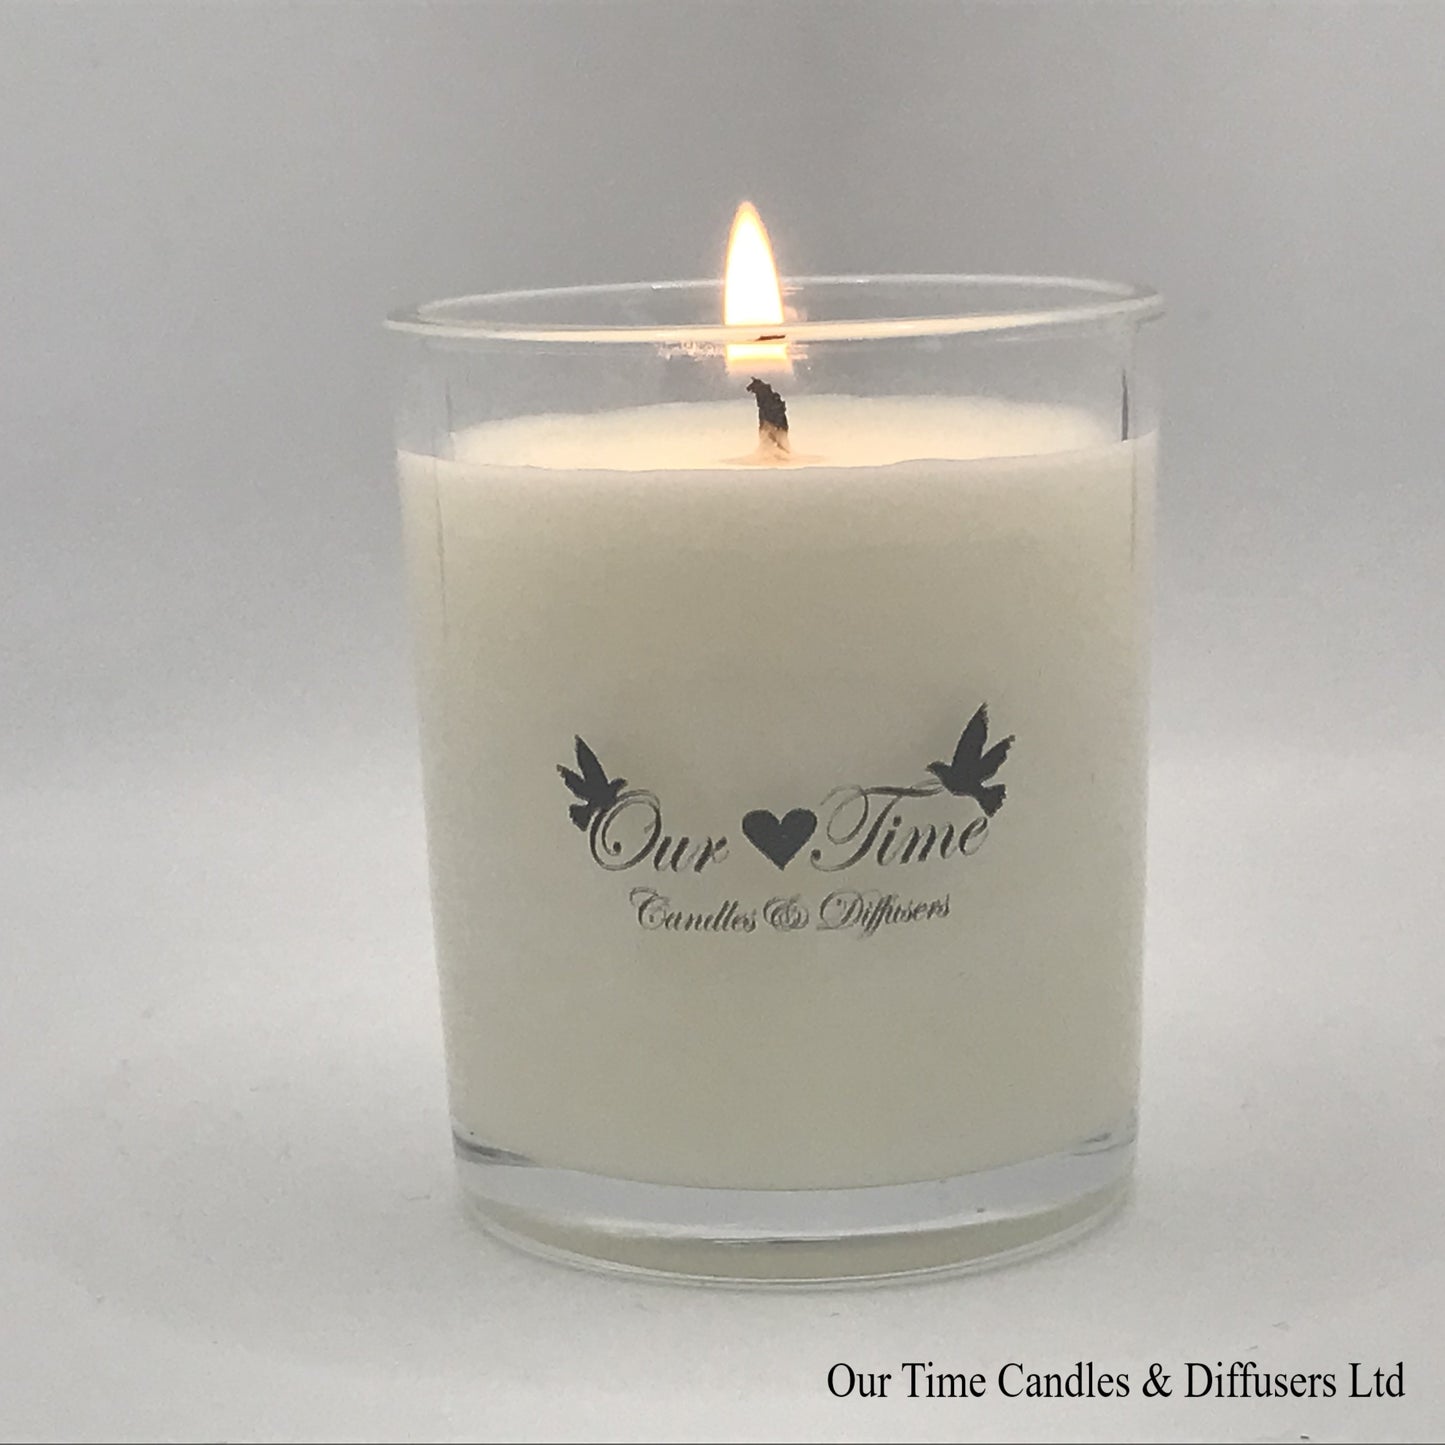 Walks in the Sun scented wax filled soy candle medium